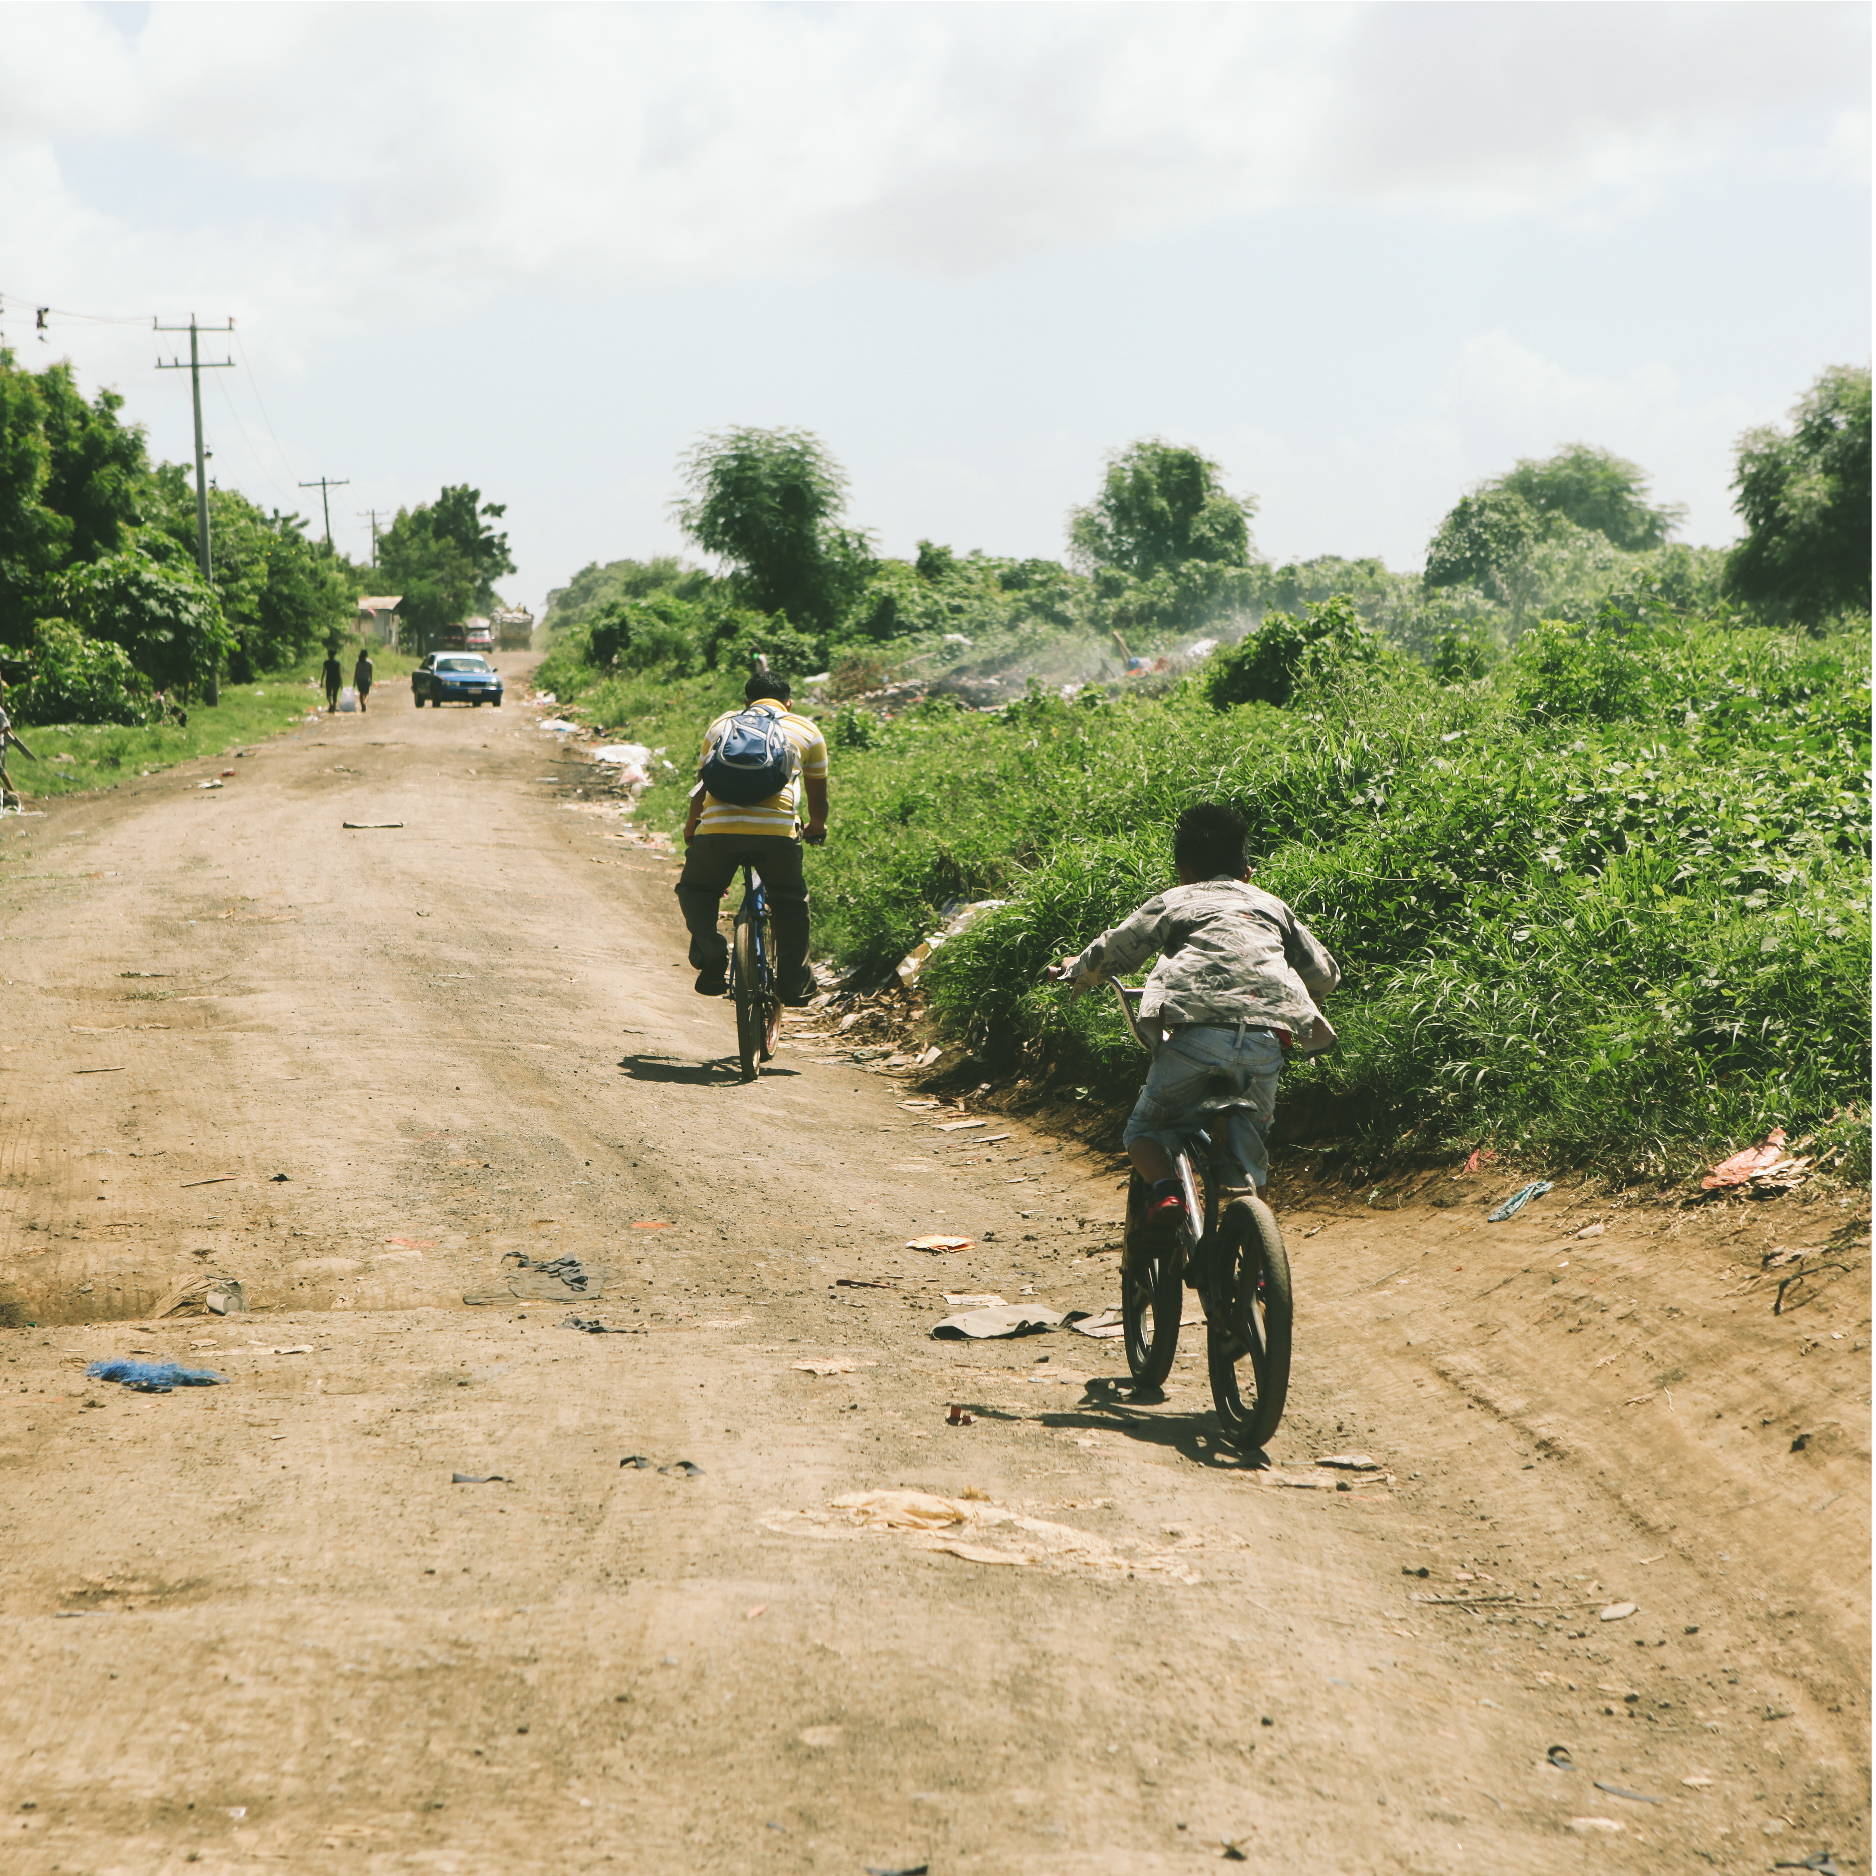 A man and his son ride their bikes down a trash lined dirt road in Nicaragua. The road is surrounded by overgrown vegetation.